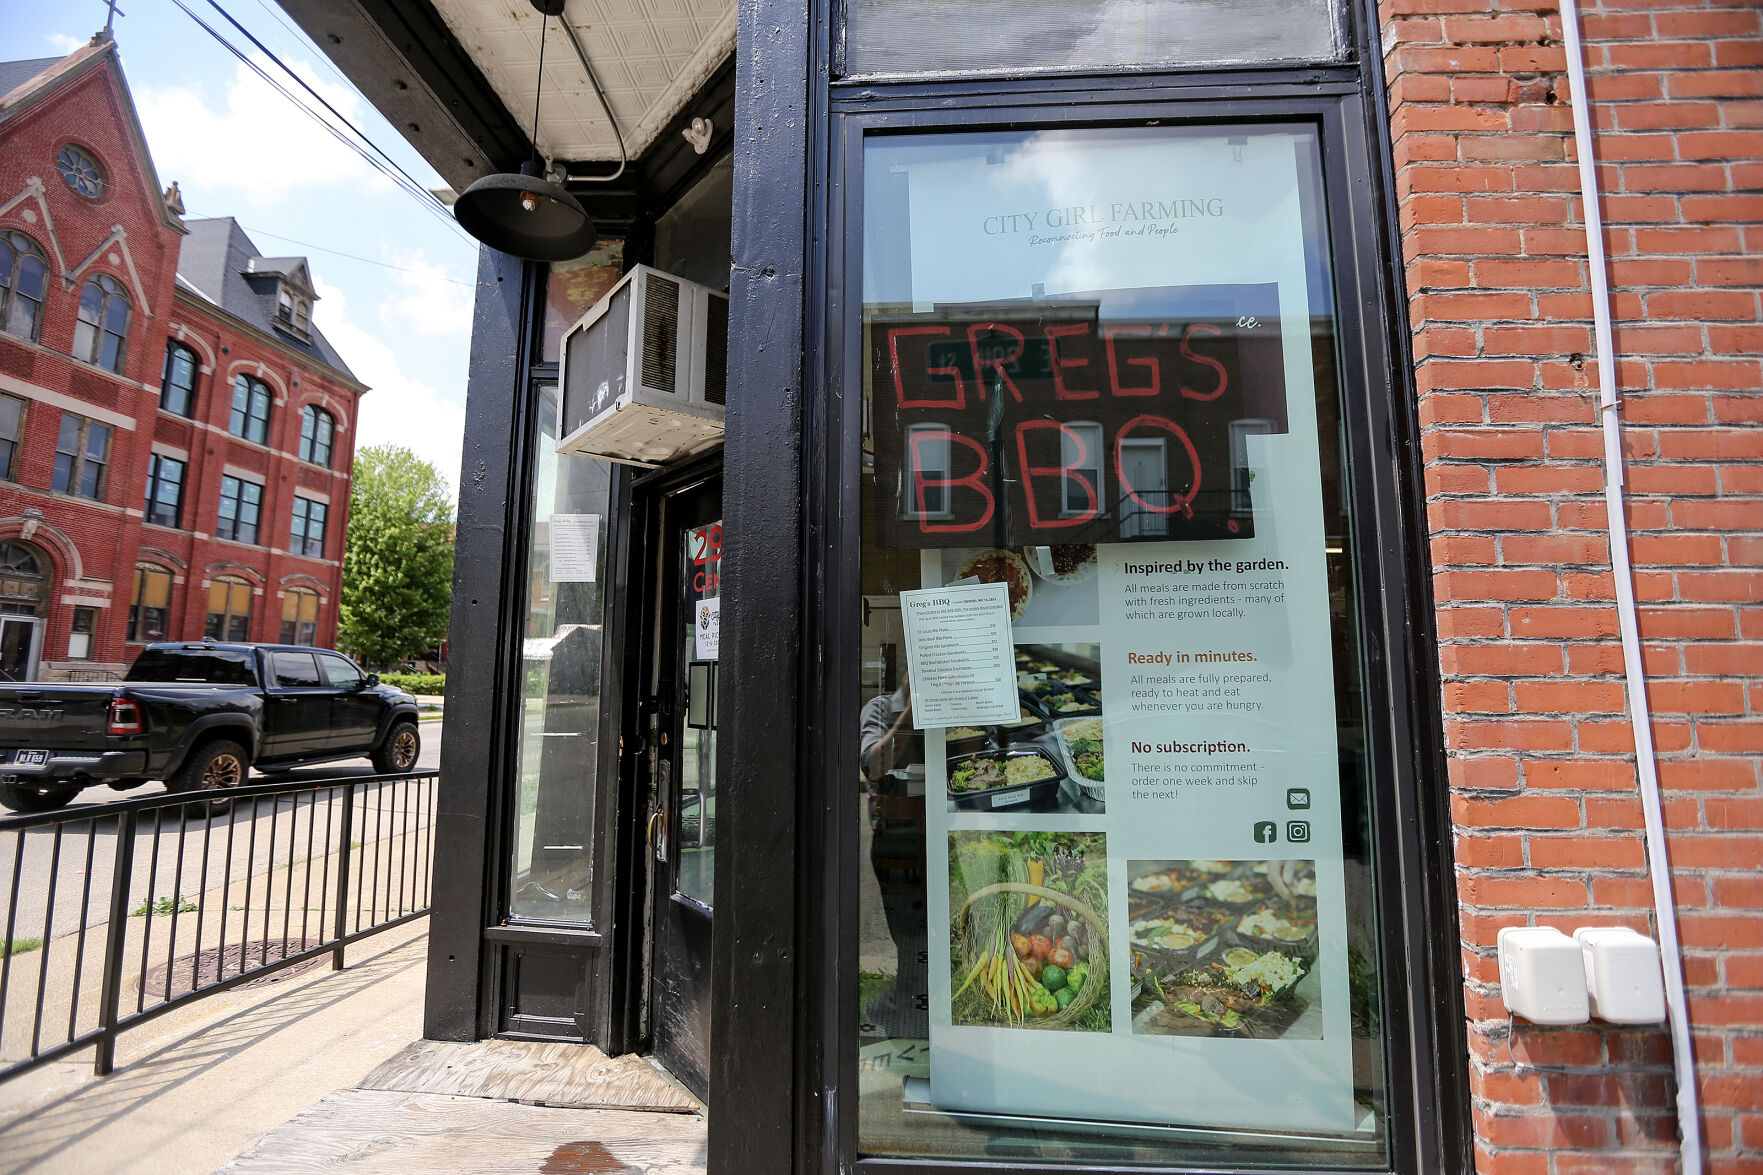 Greg’s BBQ, located at 2900 Central Ave. in Dubuque, is in a space that also houses City Girl Farming Prepared Meals.    PHOTO CREDIT: Dave Kettering